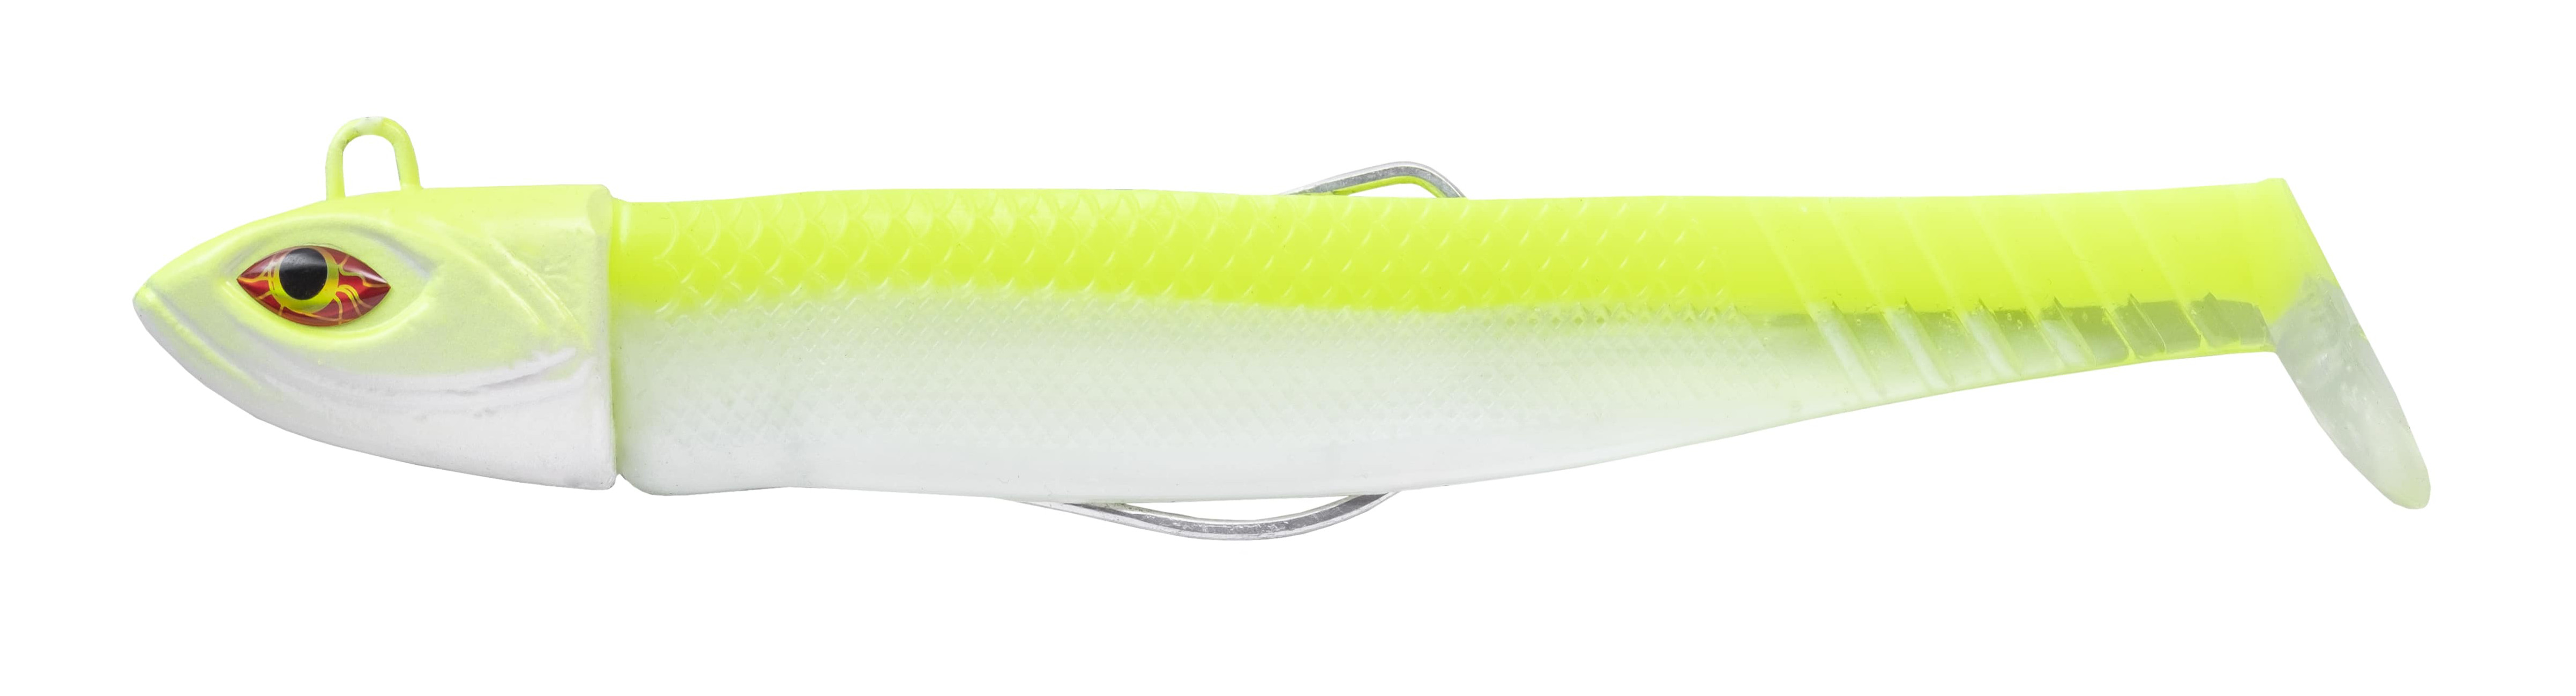 Cinnetic Crafty Candy Shad 17cm (125g) (2 pieces) - White Chartreuse